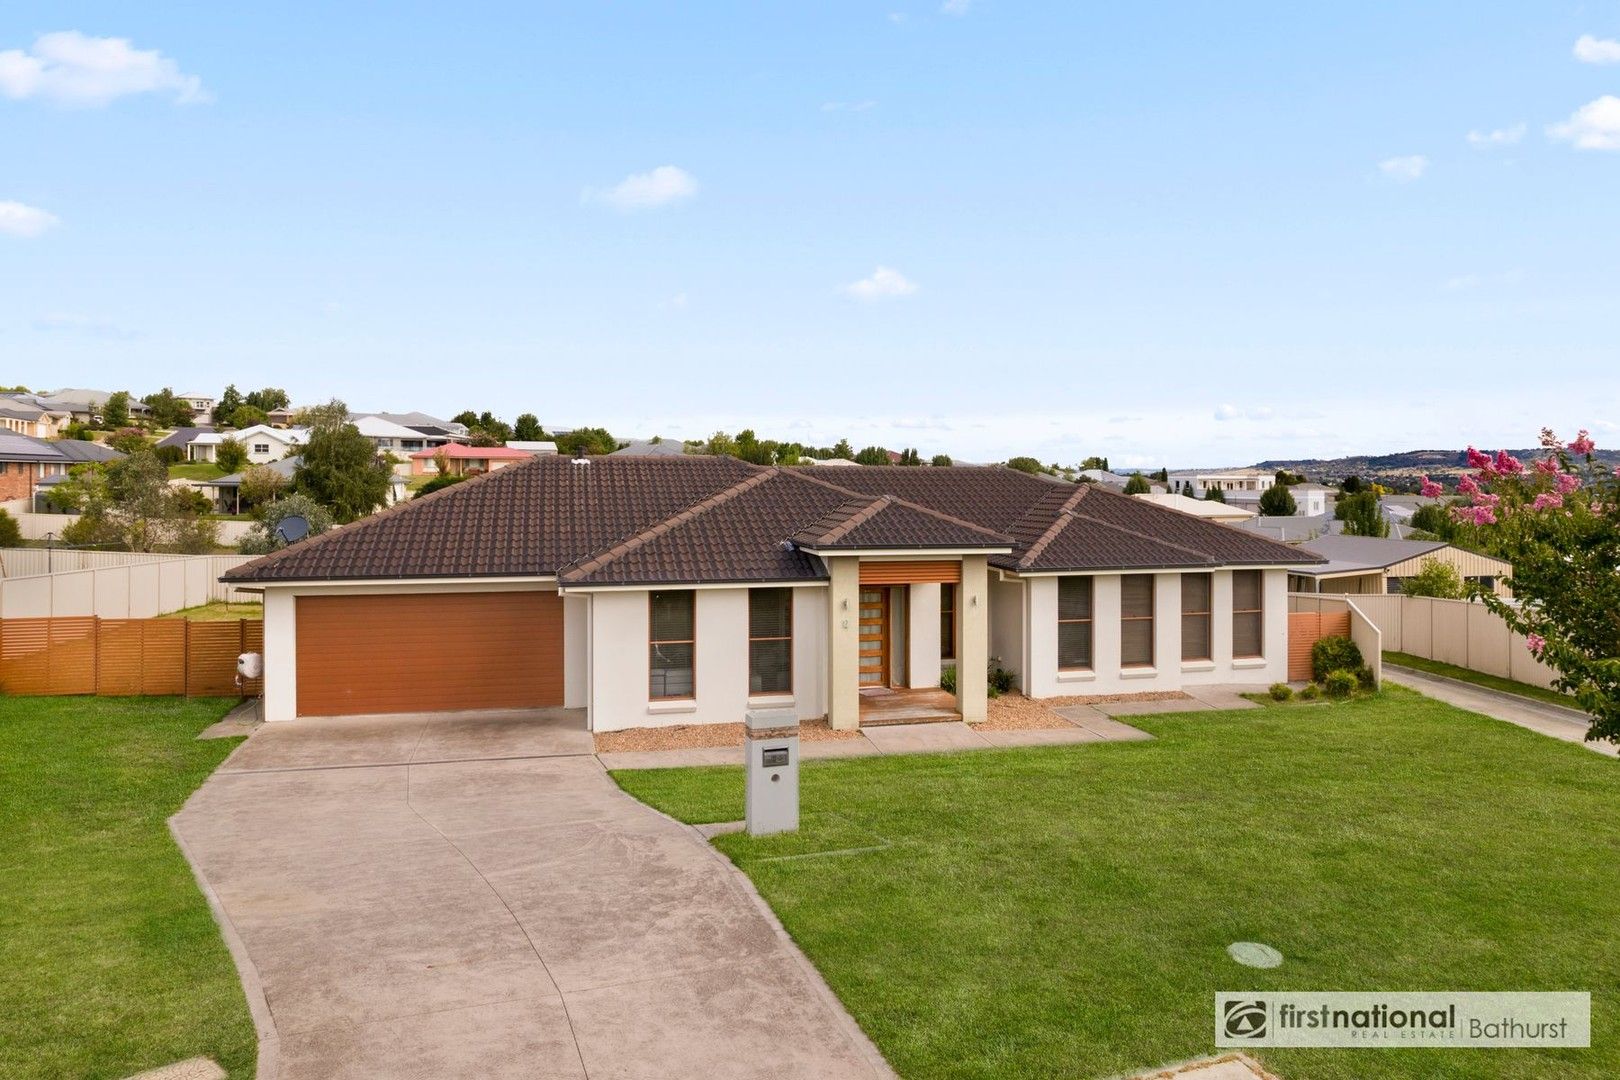 4 bedrooms House in 7 Billabong Close KELSO NSW, 2795